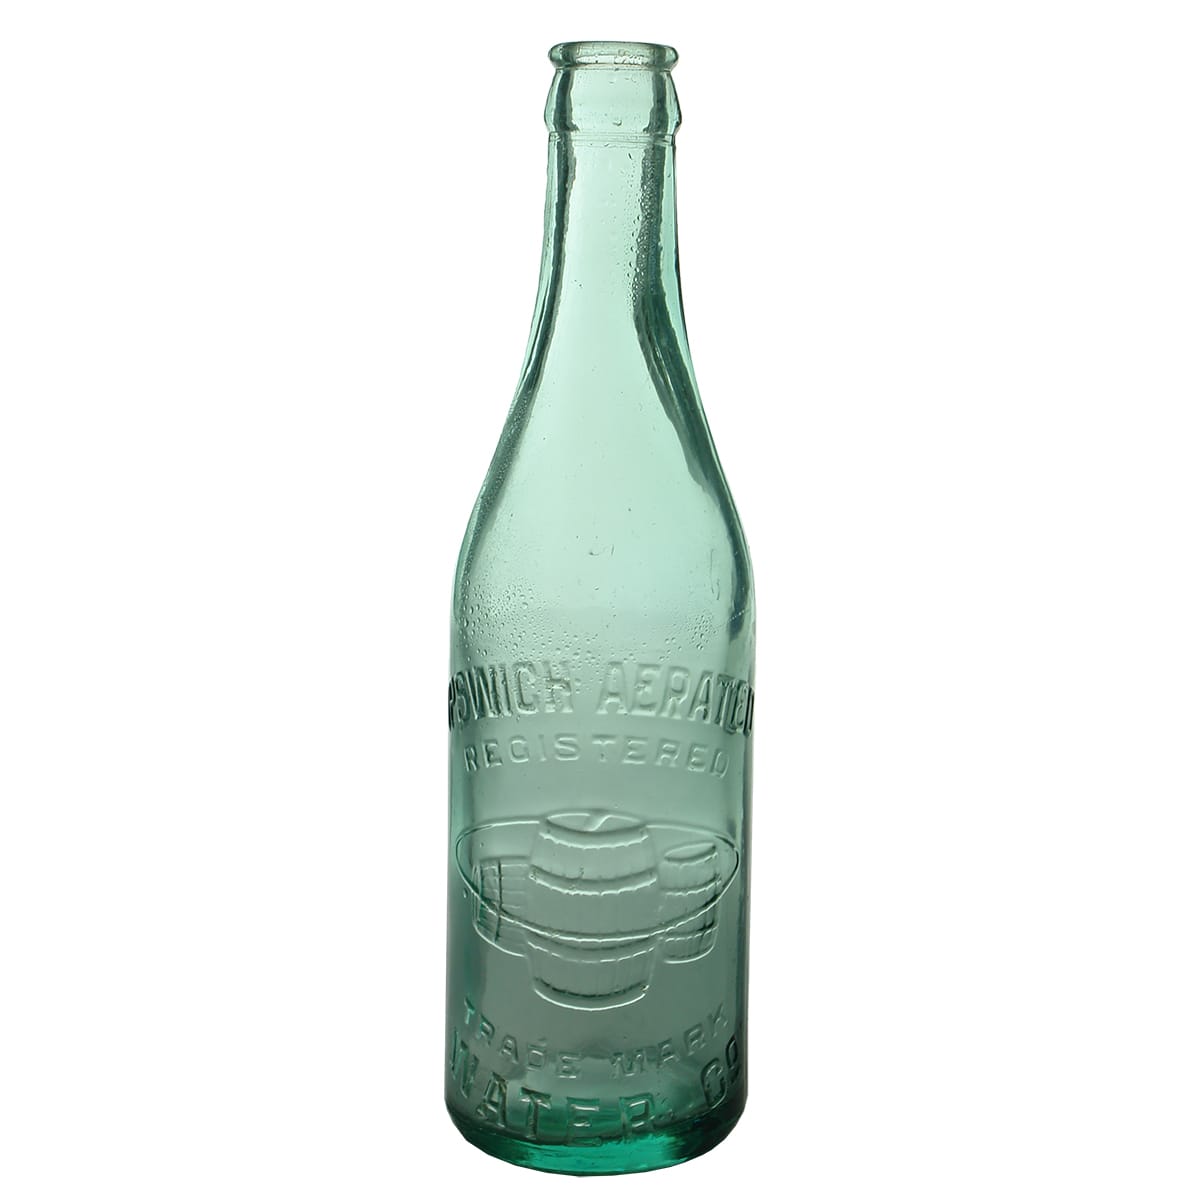 Crown Seal. Ipswich Aerated Water Co. Champagne. Aqua. 10 oz. (Queensland)